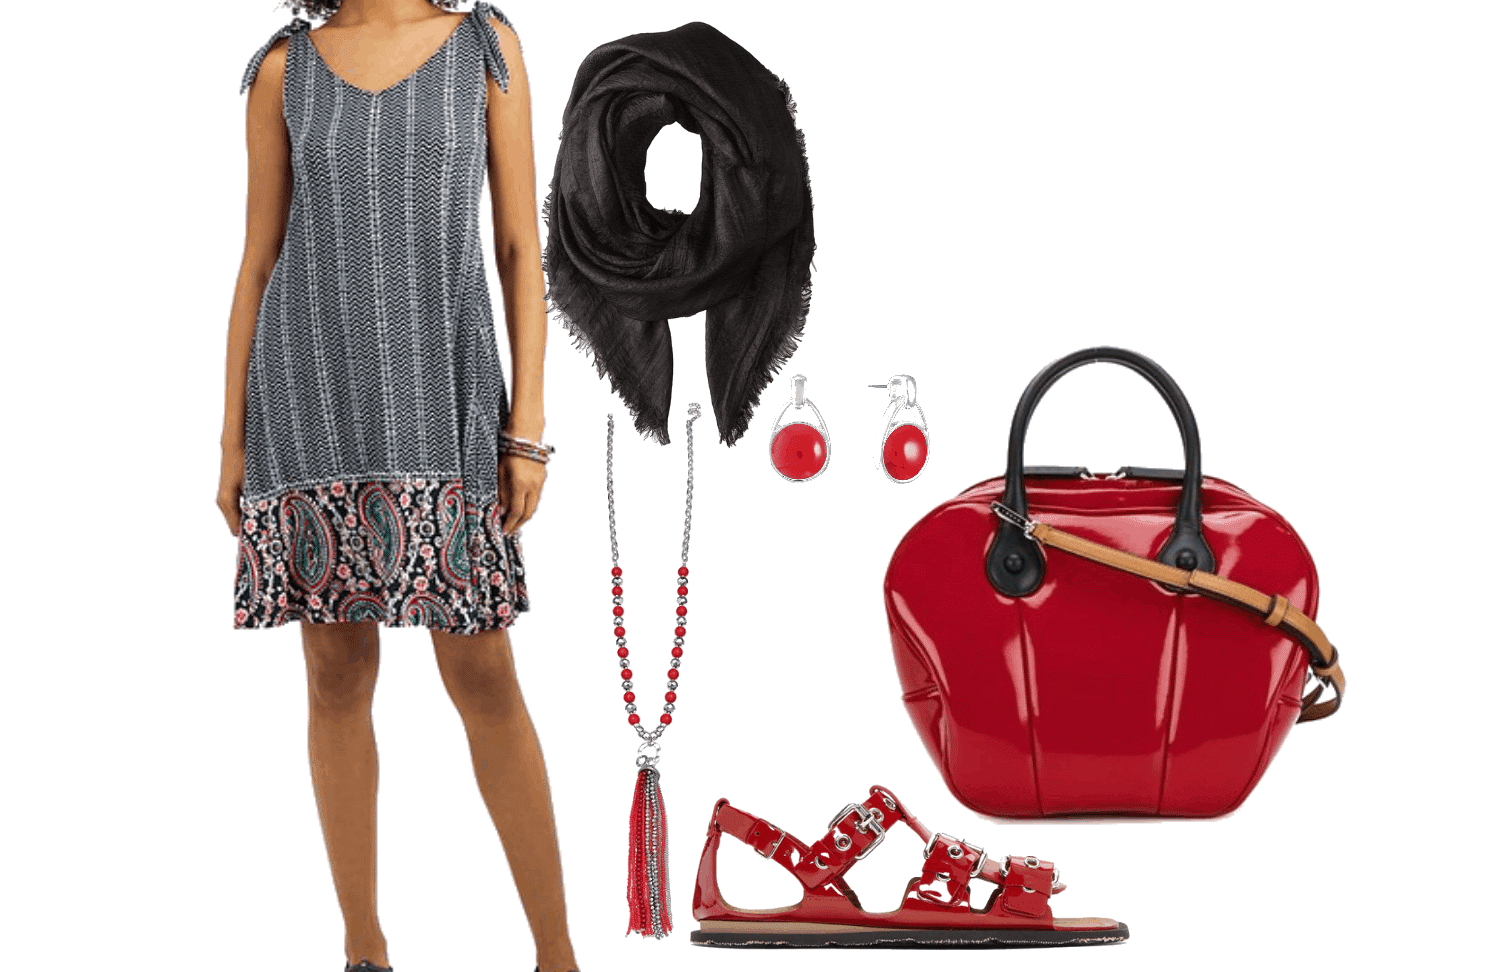 15 Beautiful Sundresses for Women Over 60 | Sixty and Me